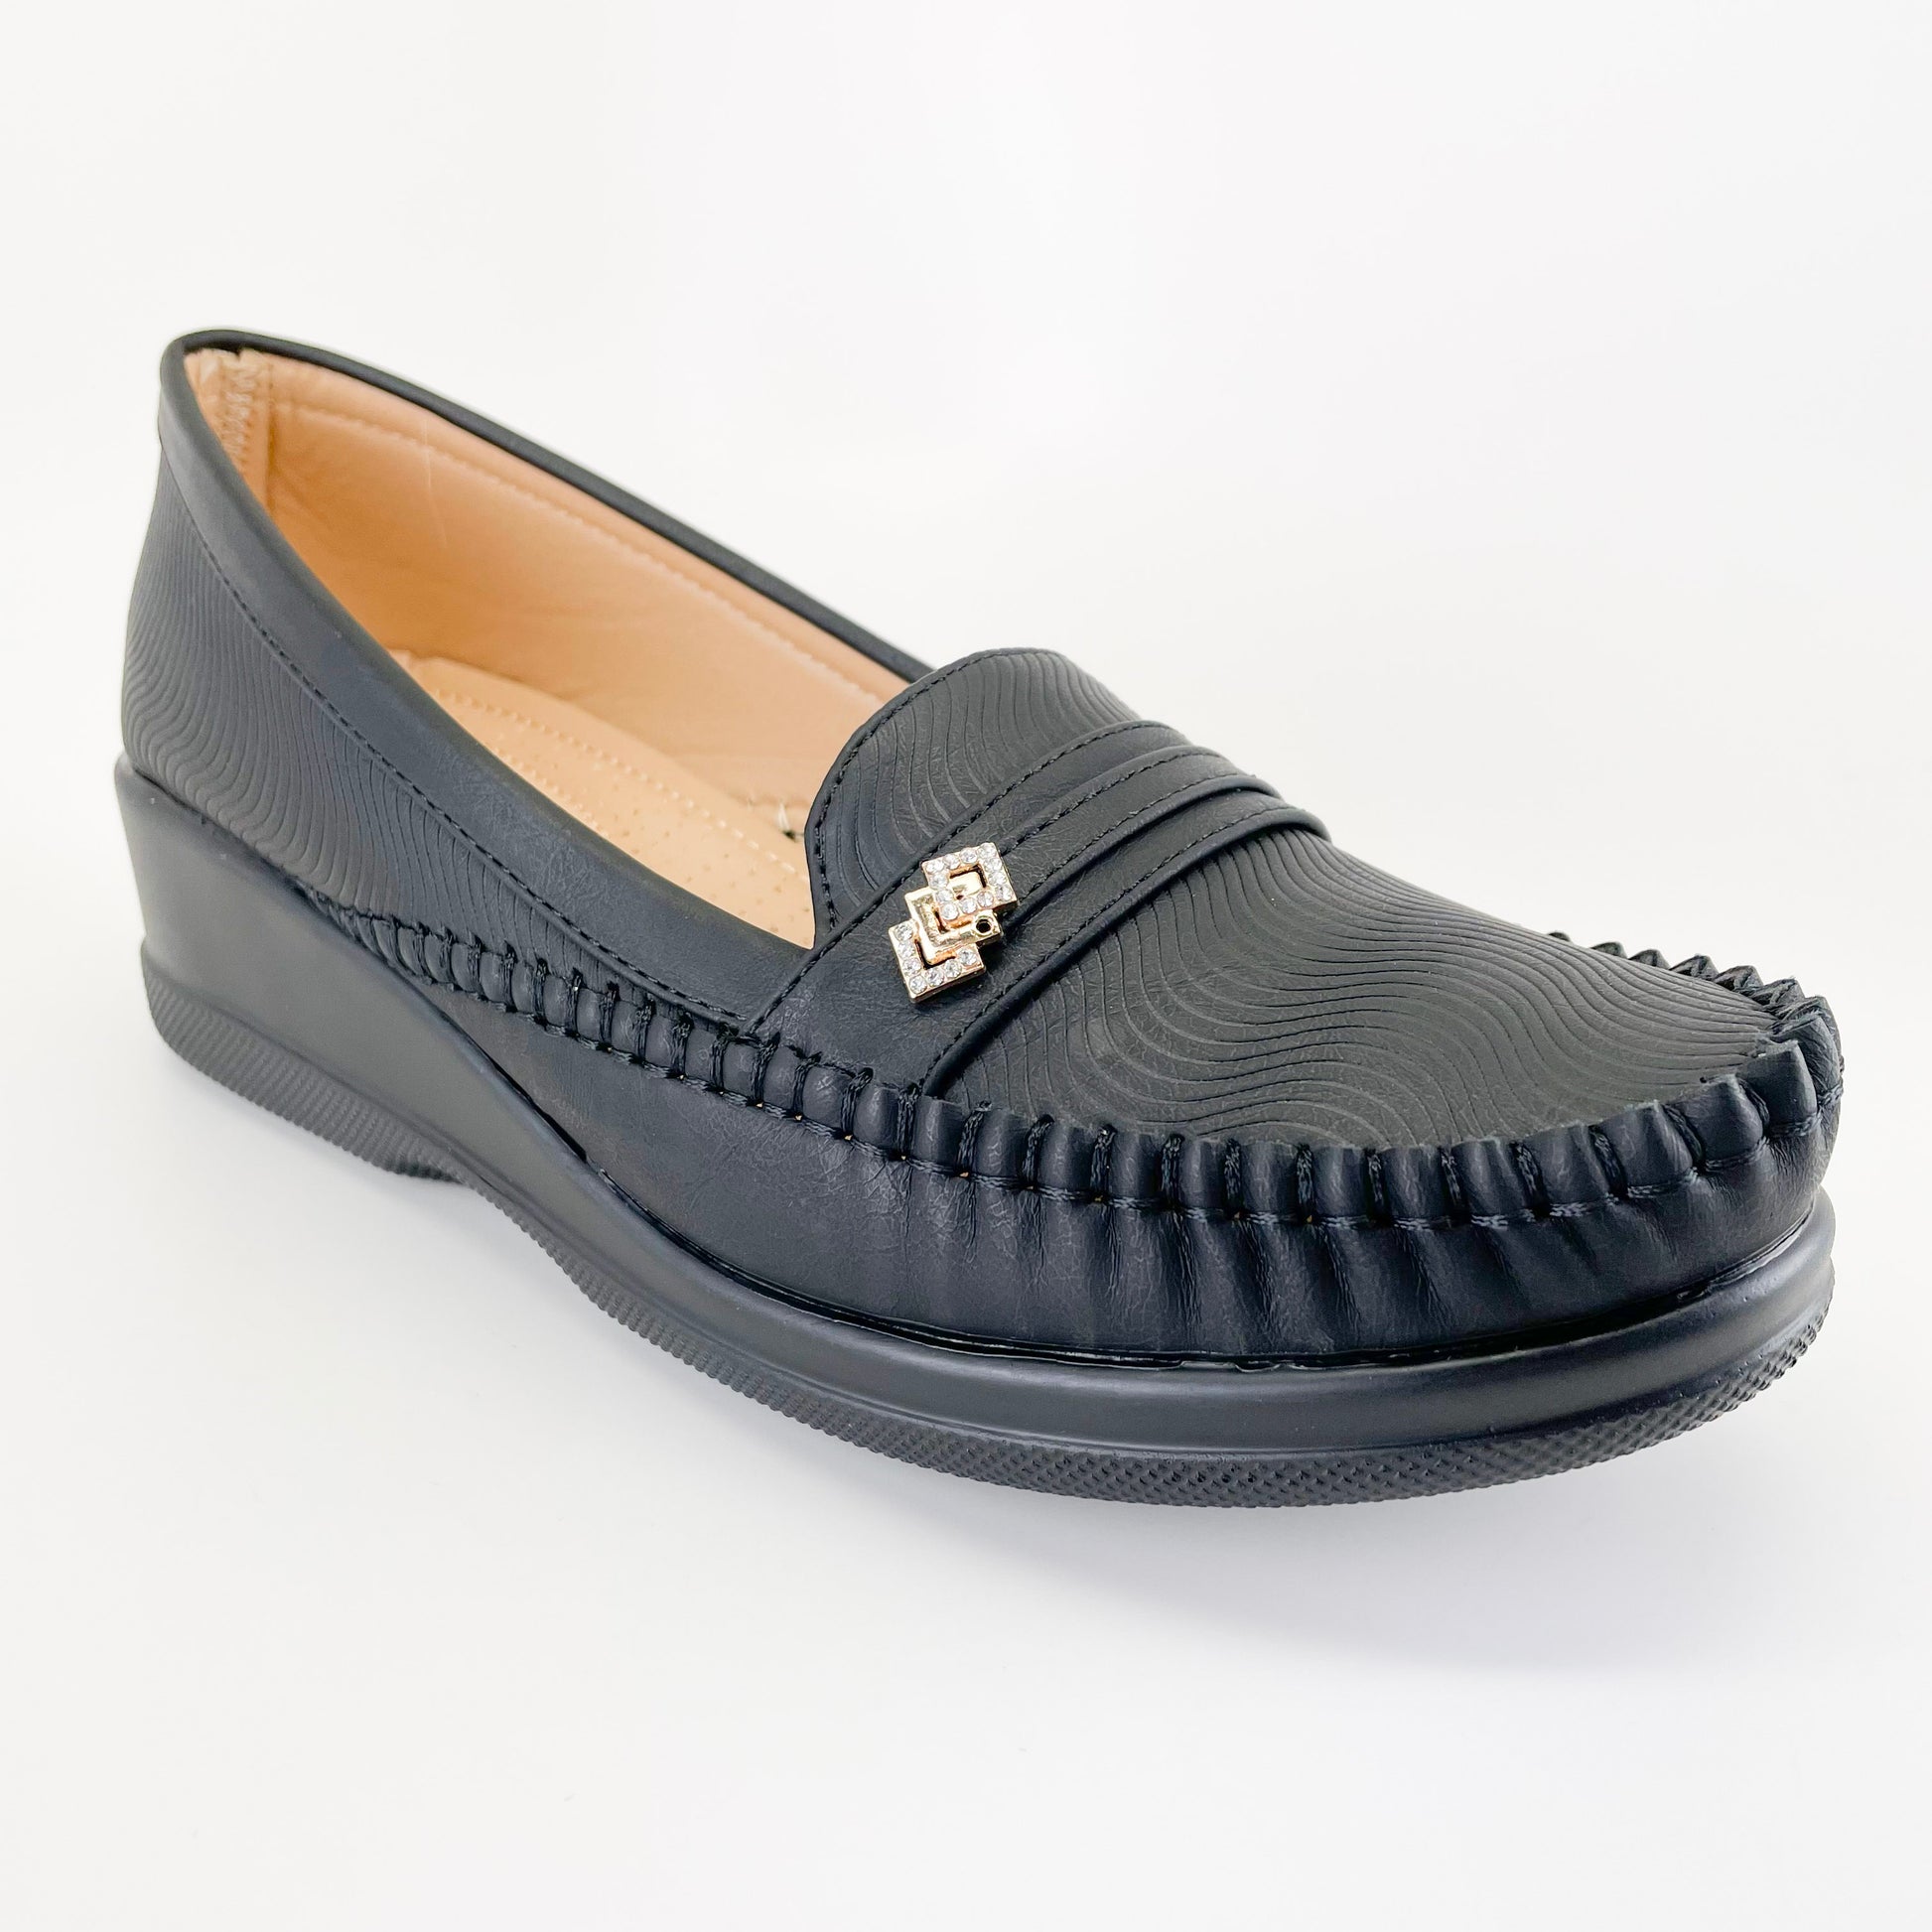 gj collection fn-14 womens black wedge heel loafers